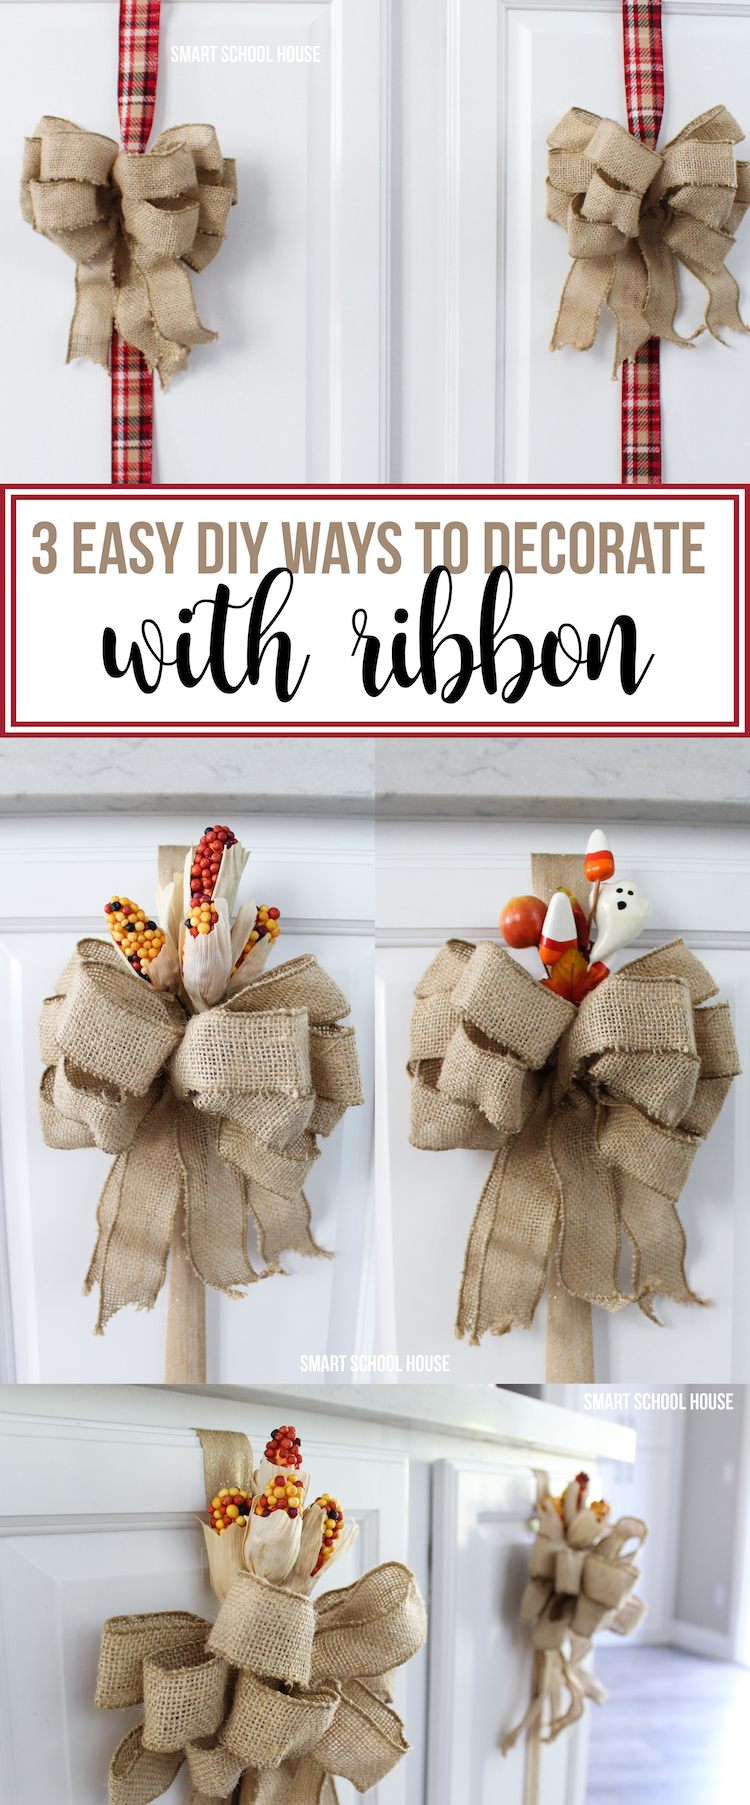 3 Easy ways to decorate with ribbon. Reuse ribbon on cupboards and switch up the patterns throughout the holidays. Inexpensive and ADORABLE! 